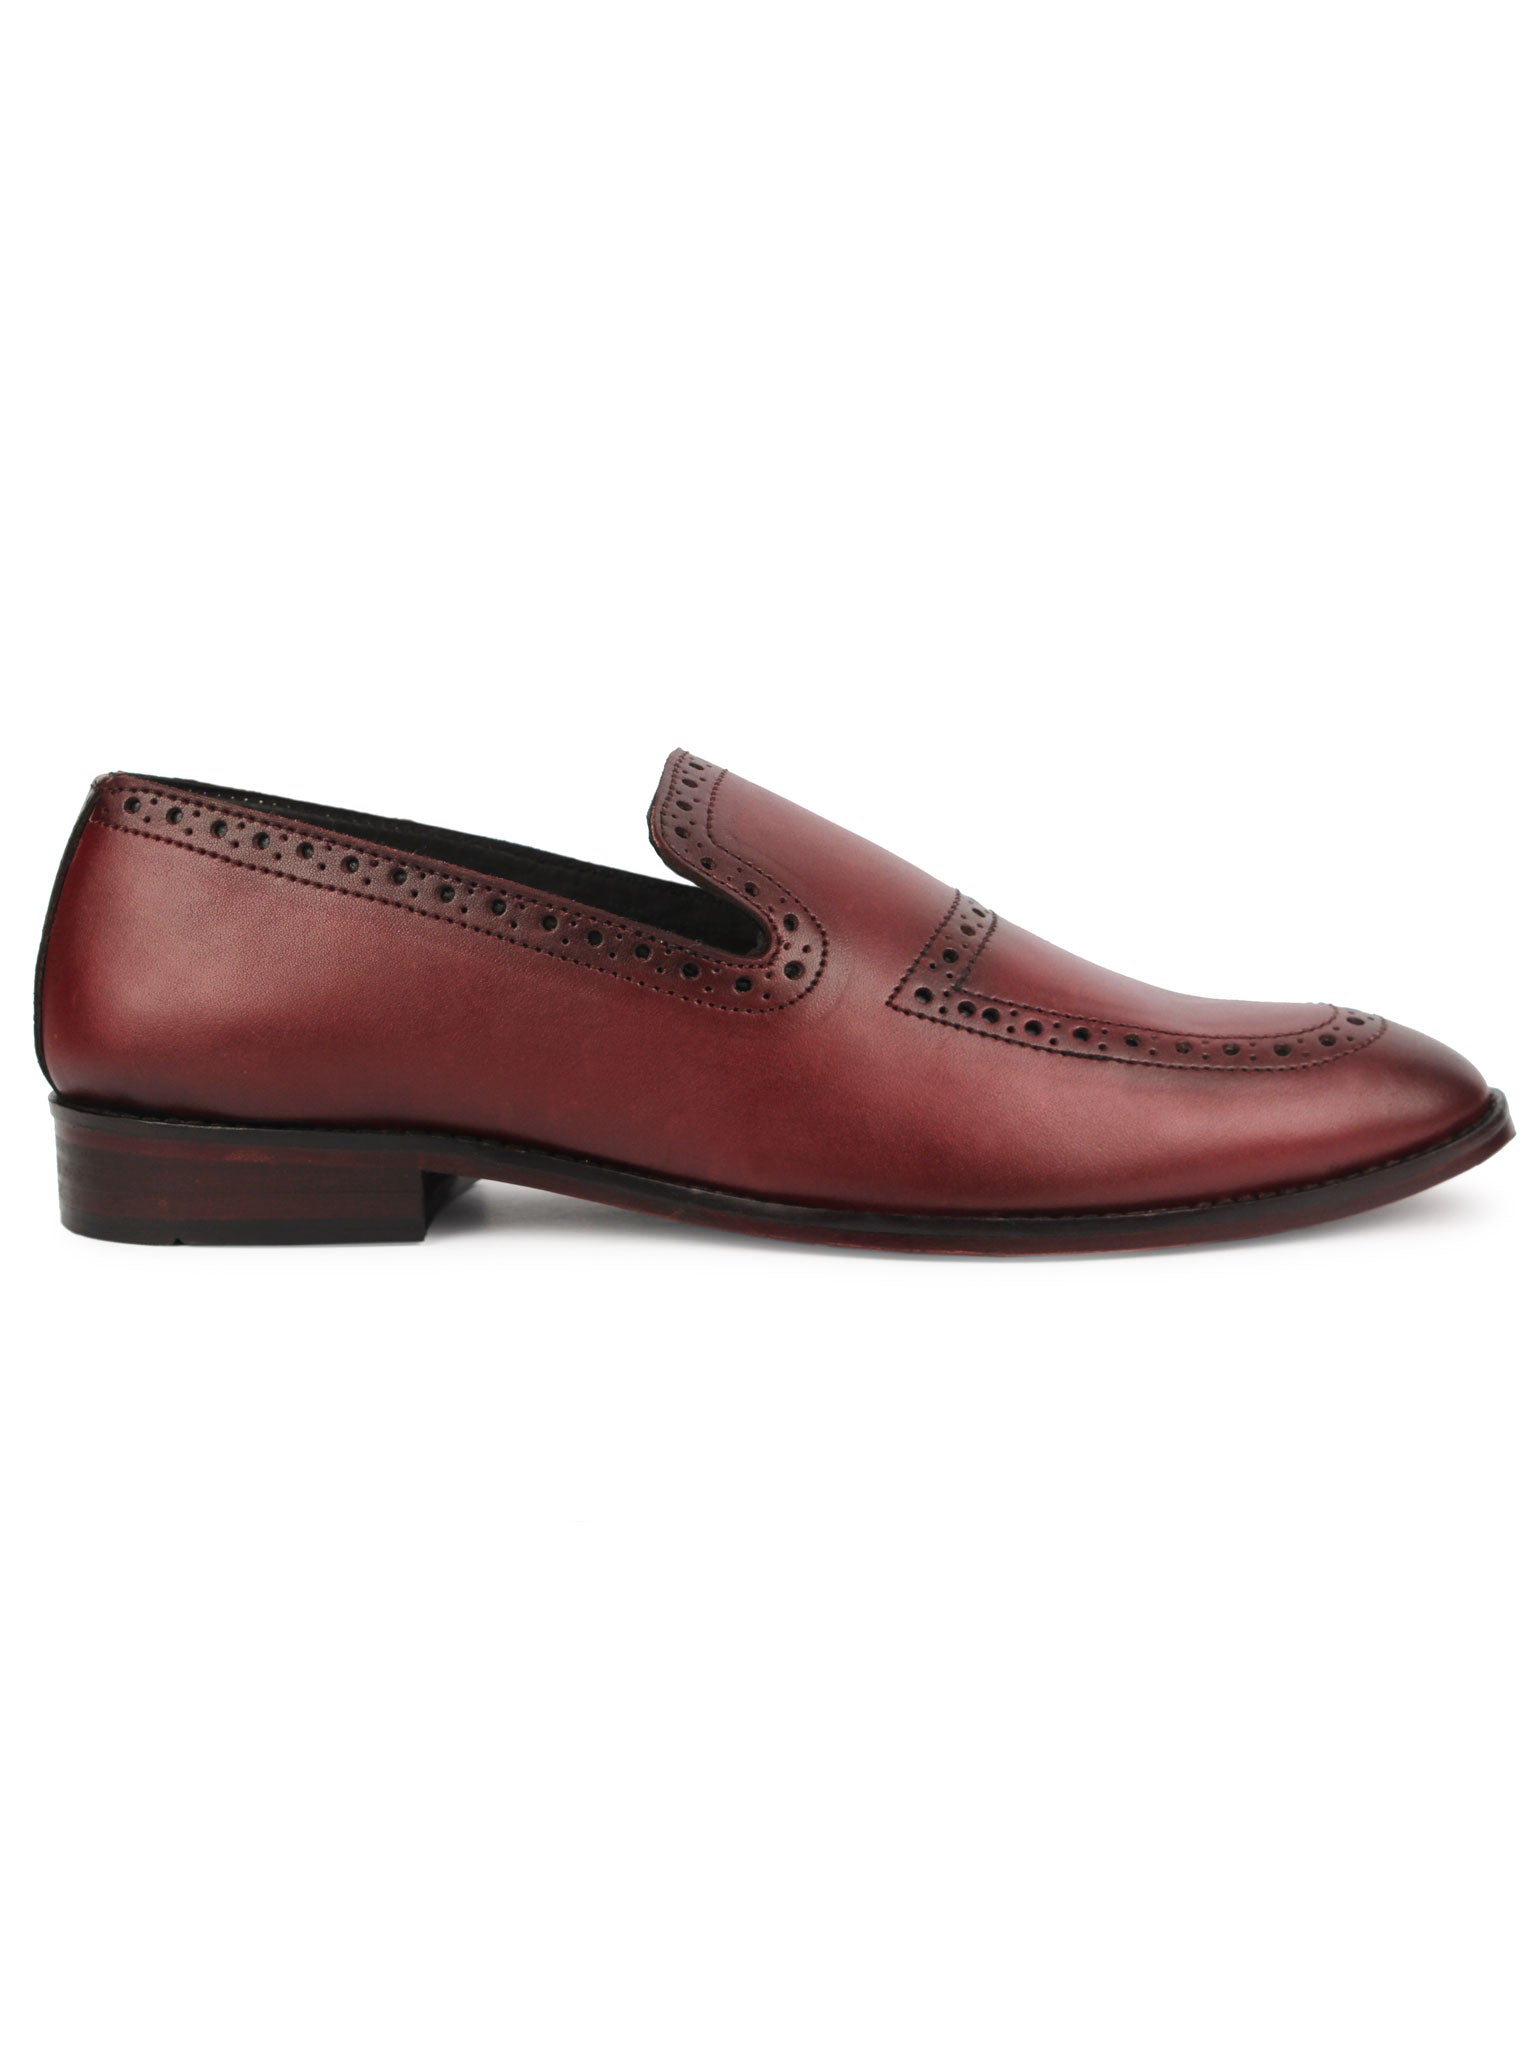 Brogue Loafers - Oxblood